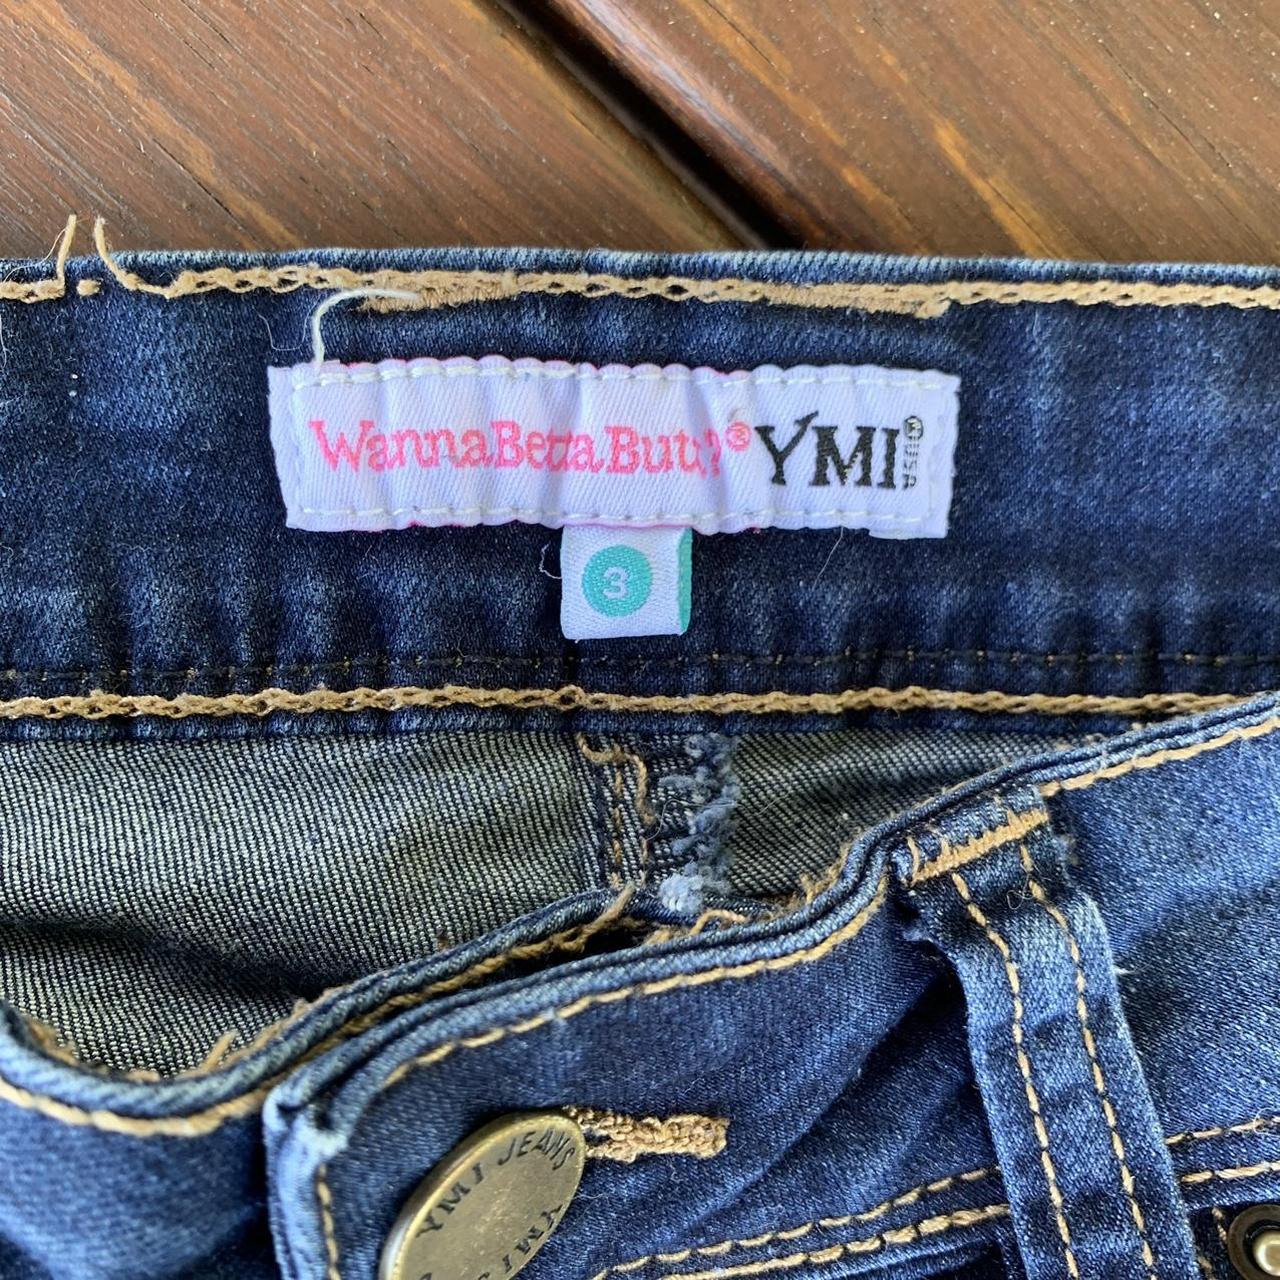 YMI JEANS blue jeans/jorts has three buttons and - Depop